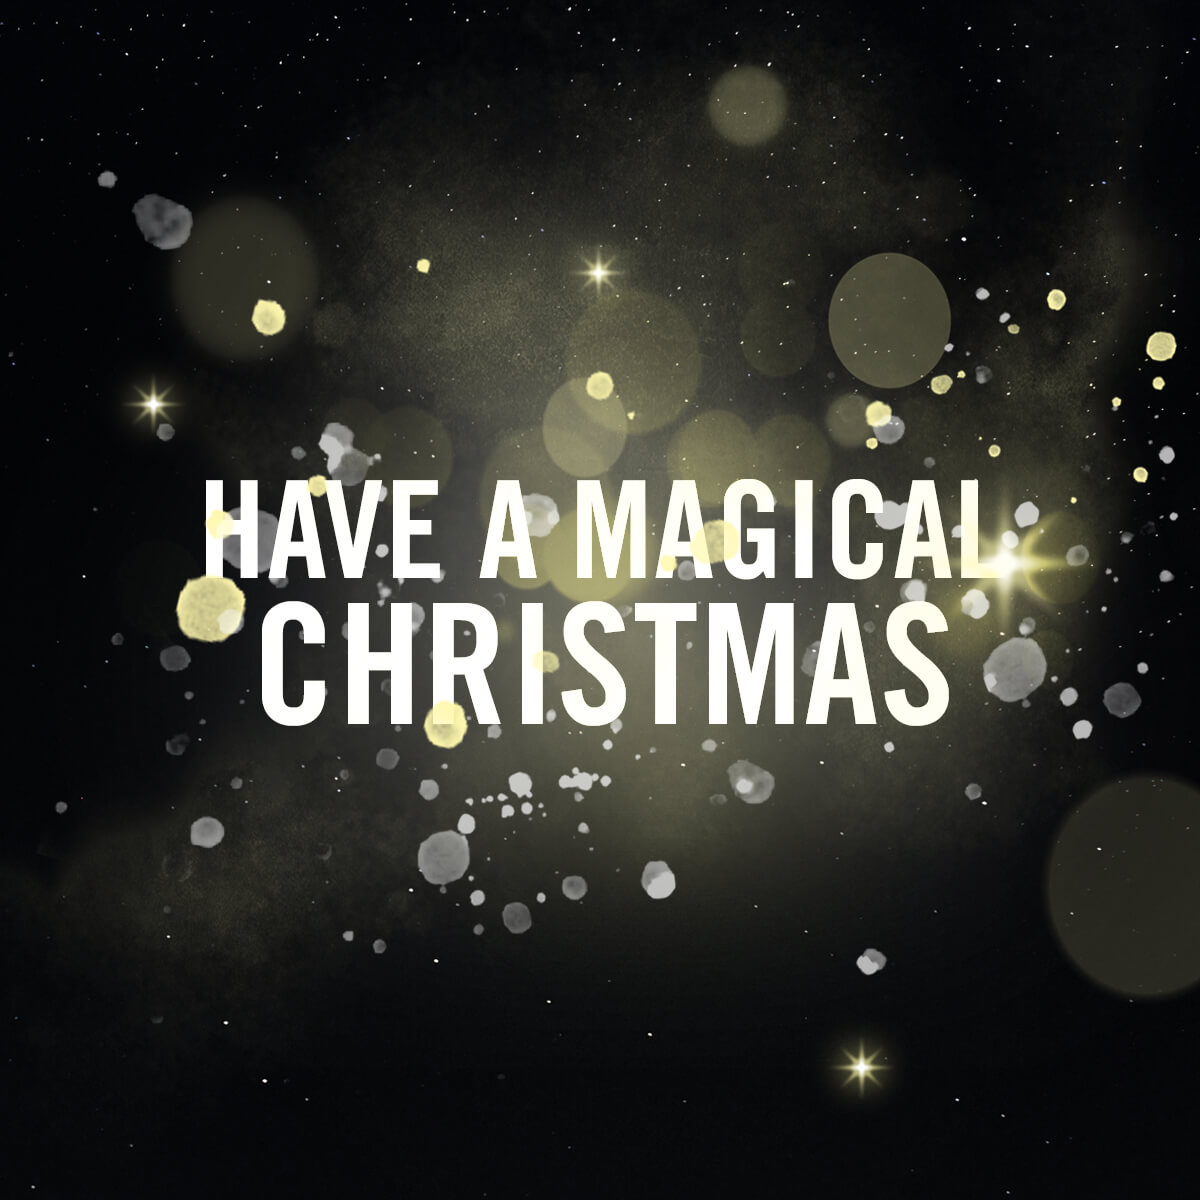 Have a magical Christmas